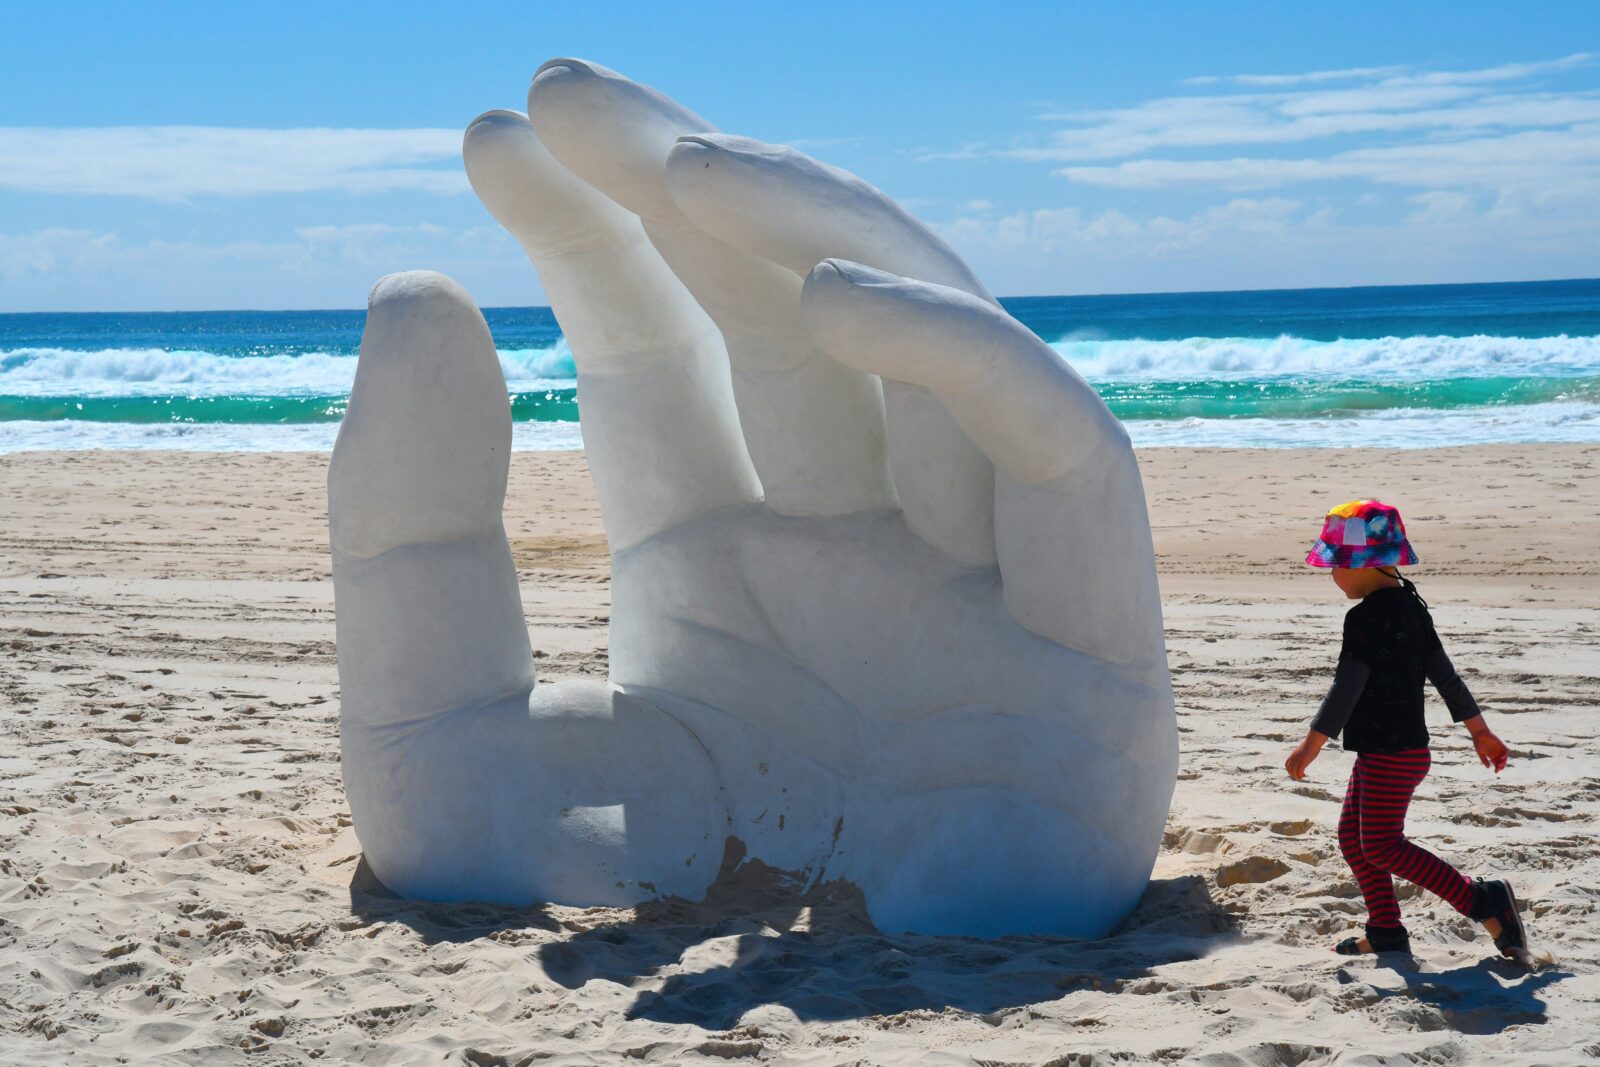 A giant hand gently reaching out of the sand, sitting at 2.4m high, conveying openness and trust.